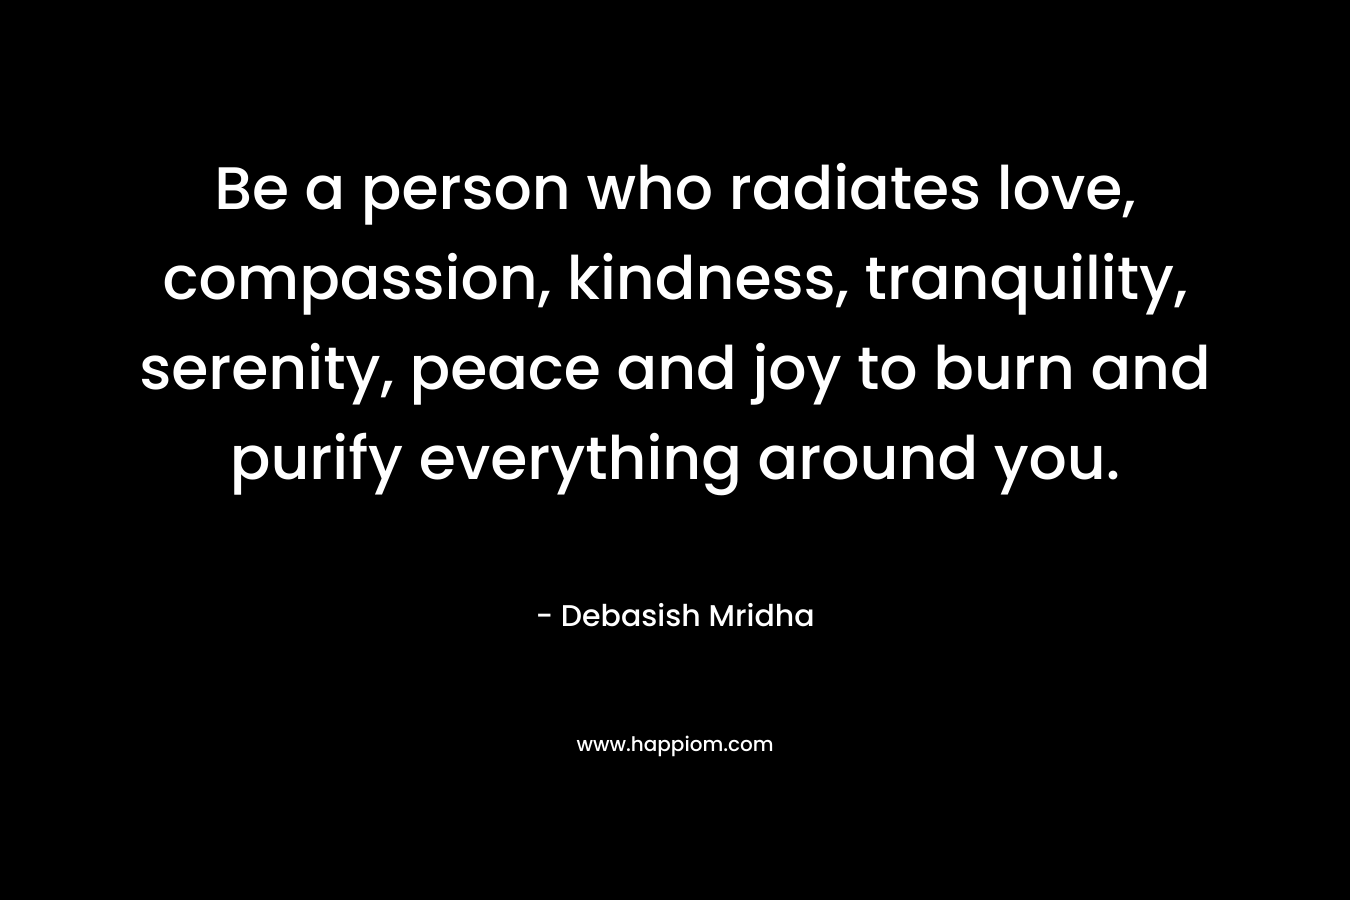 Be a person who radiates love, compassion, kindness, tranquility, serenity, peace and joy to burn and purify everything around you. – Debasish Mridha